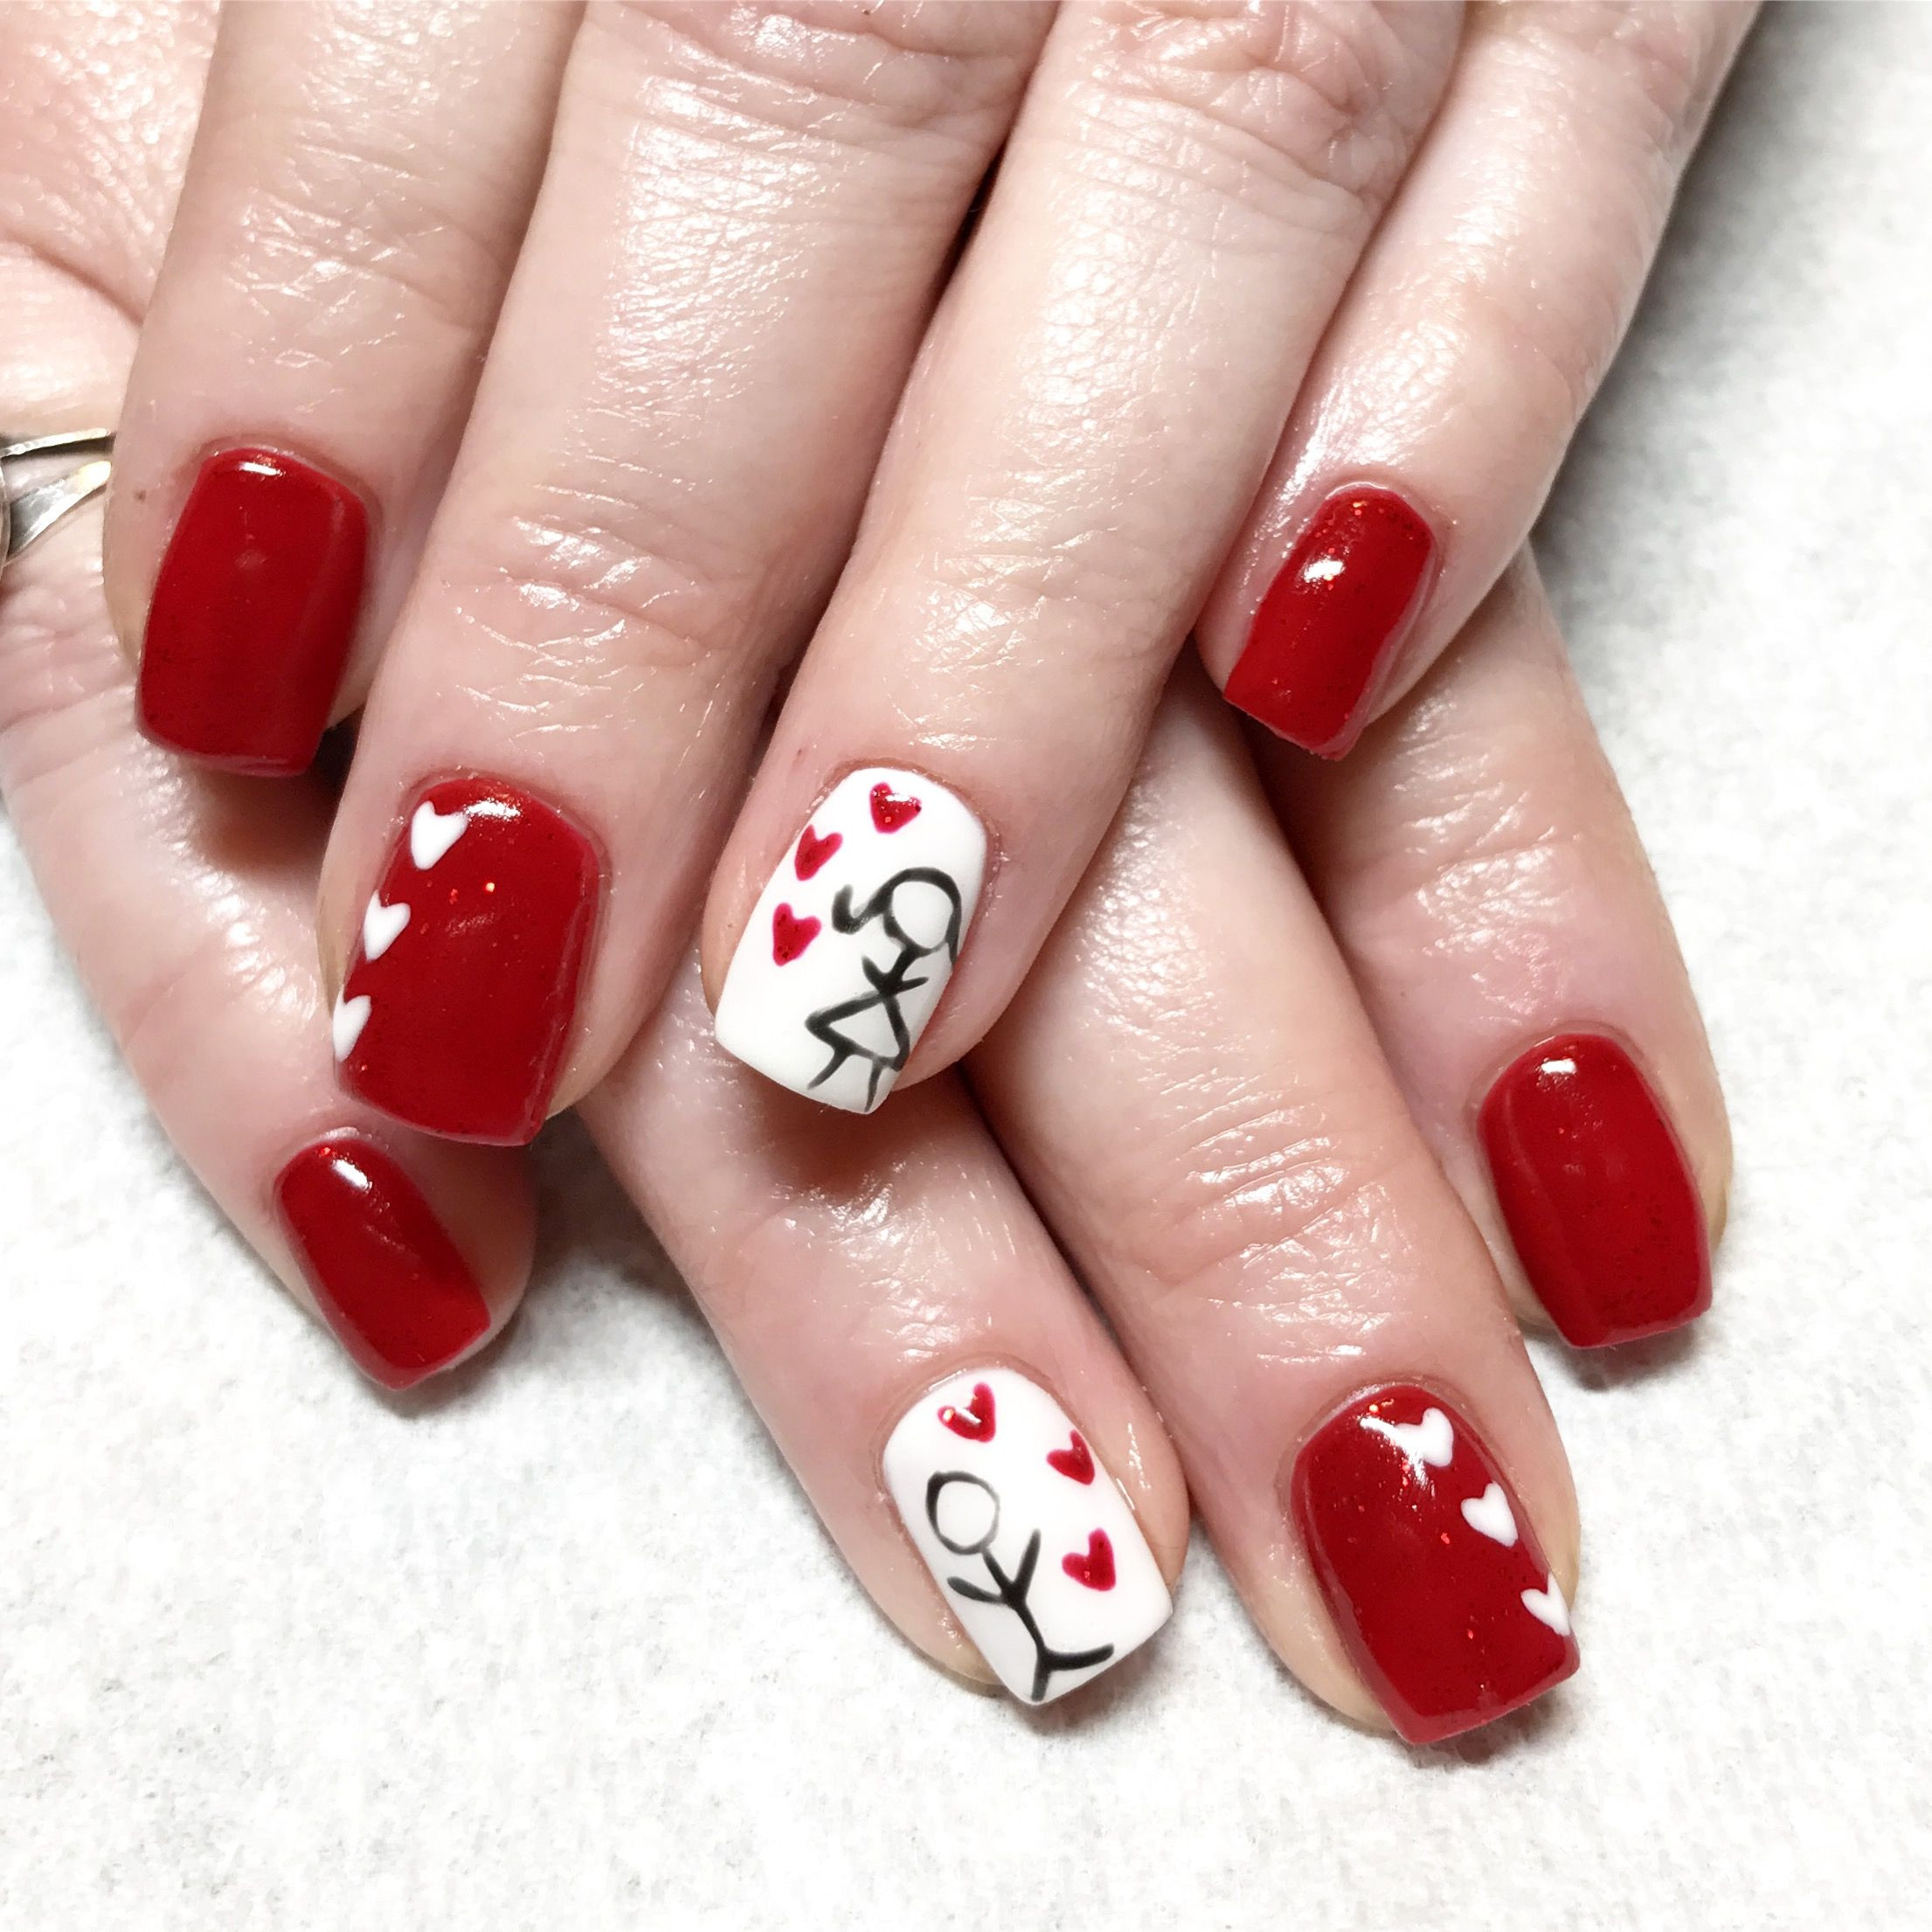 Red Gel Nail Designs
 Valentine nails Gel nails Red nails Heart nails Hand